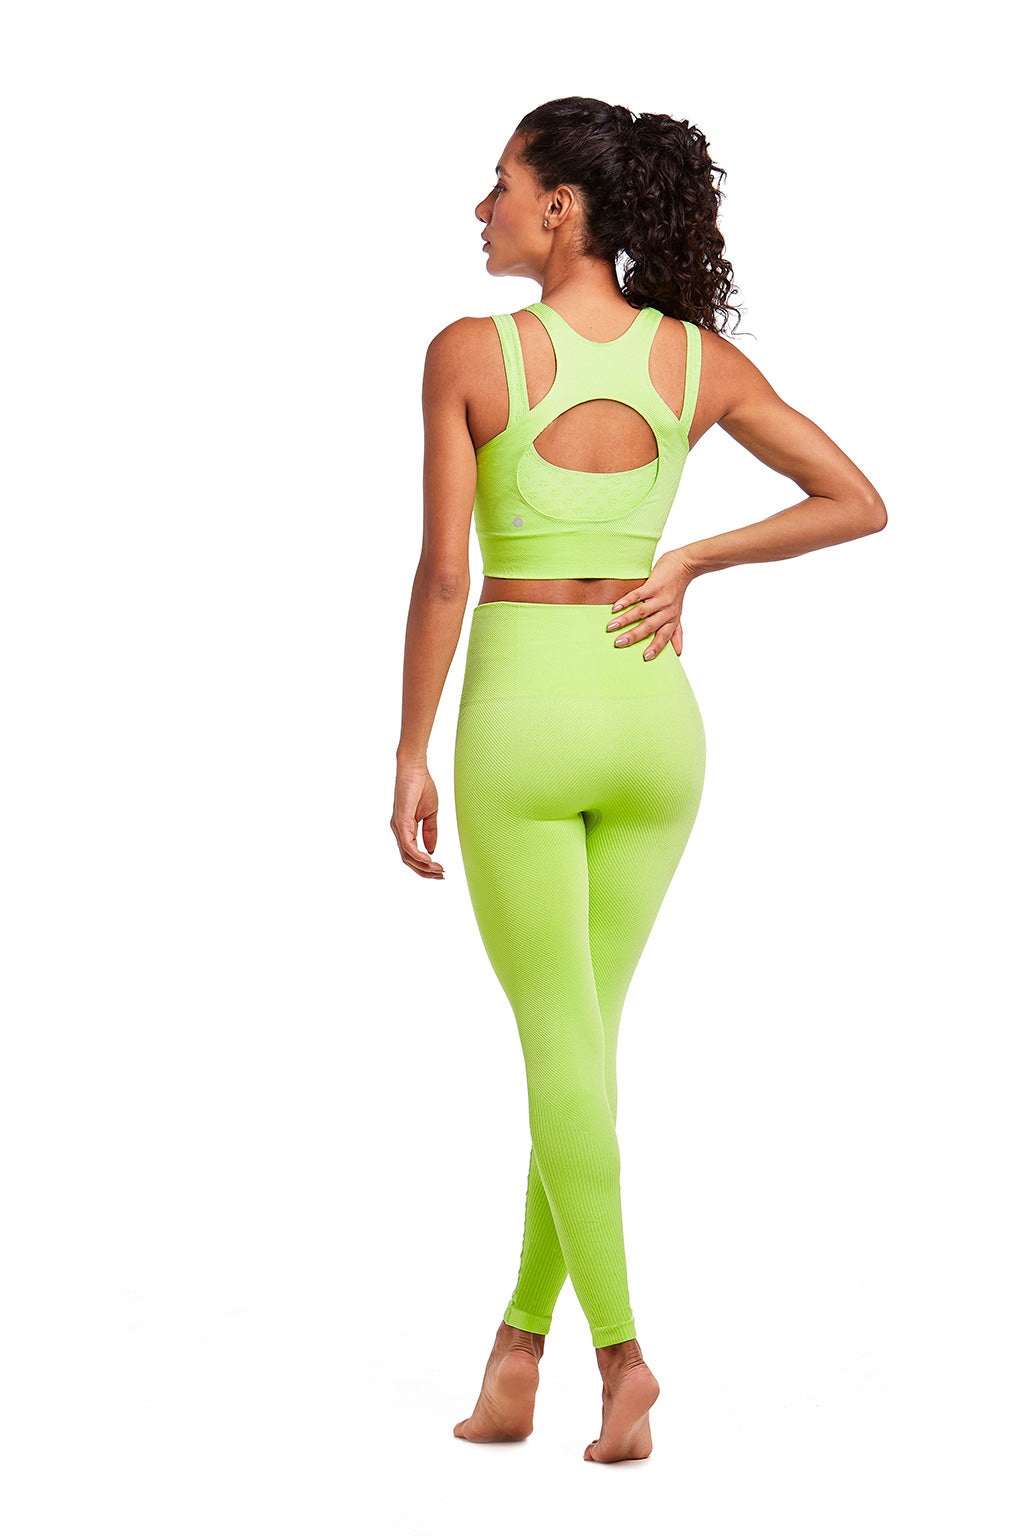 TURQUOISE FITNESS SET WITH PUSH UP QUICAS BRASIL LEGGINGS